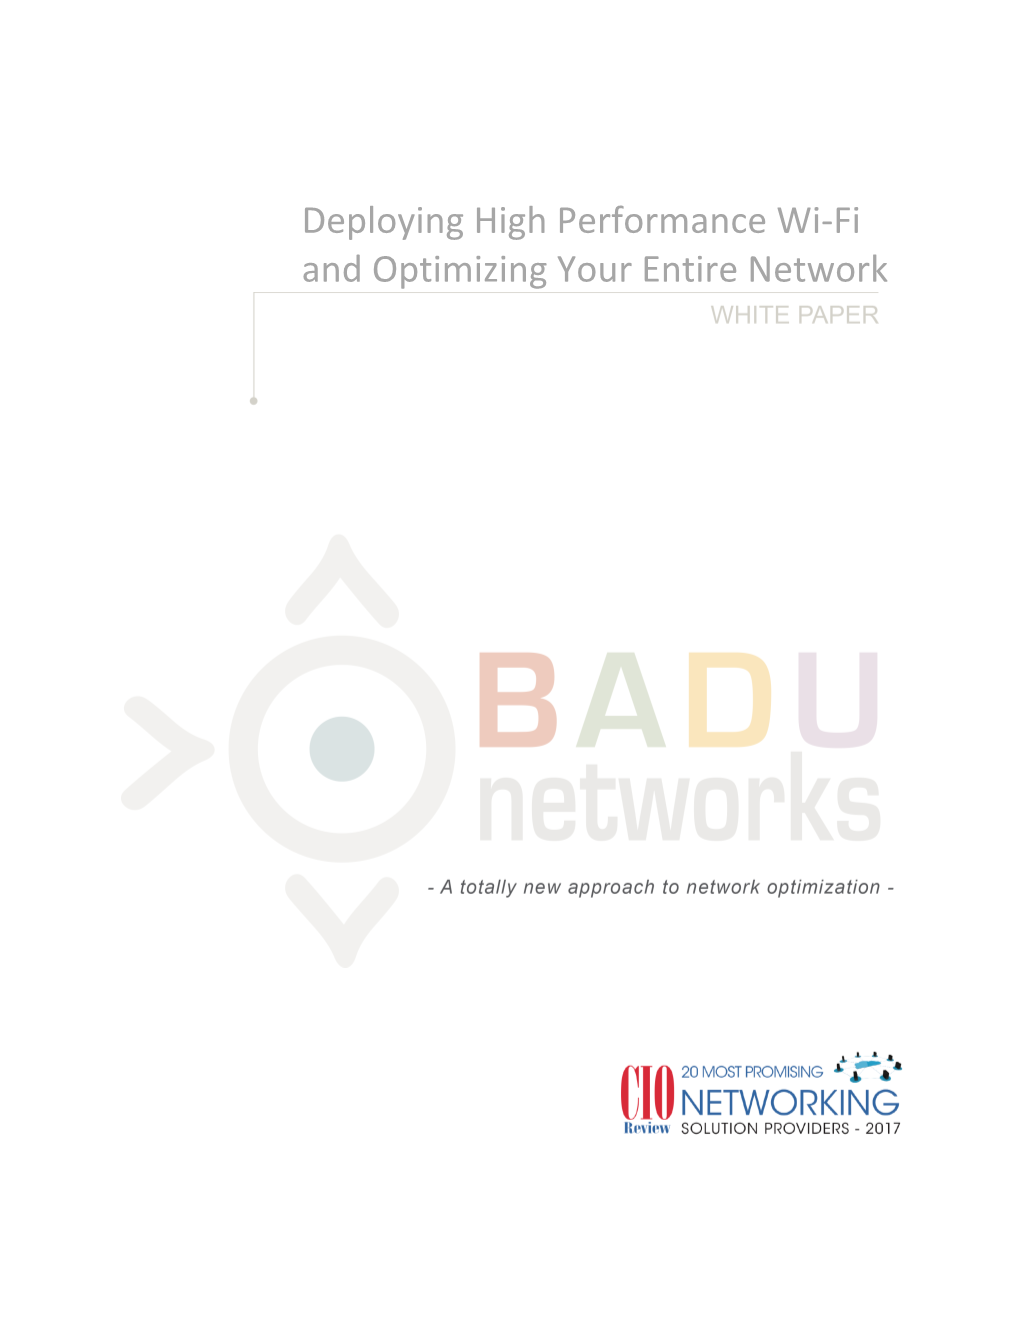 Deploying High Performance Wi-Fi and Optimizing Your Entire Network